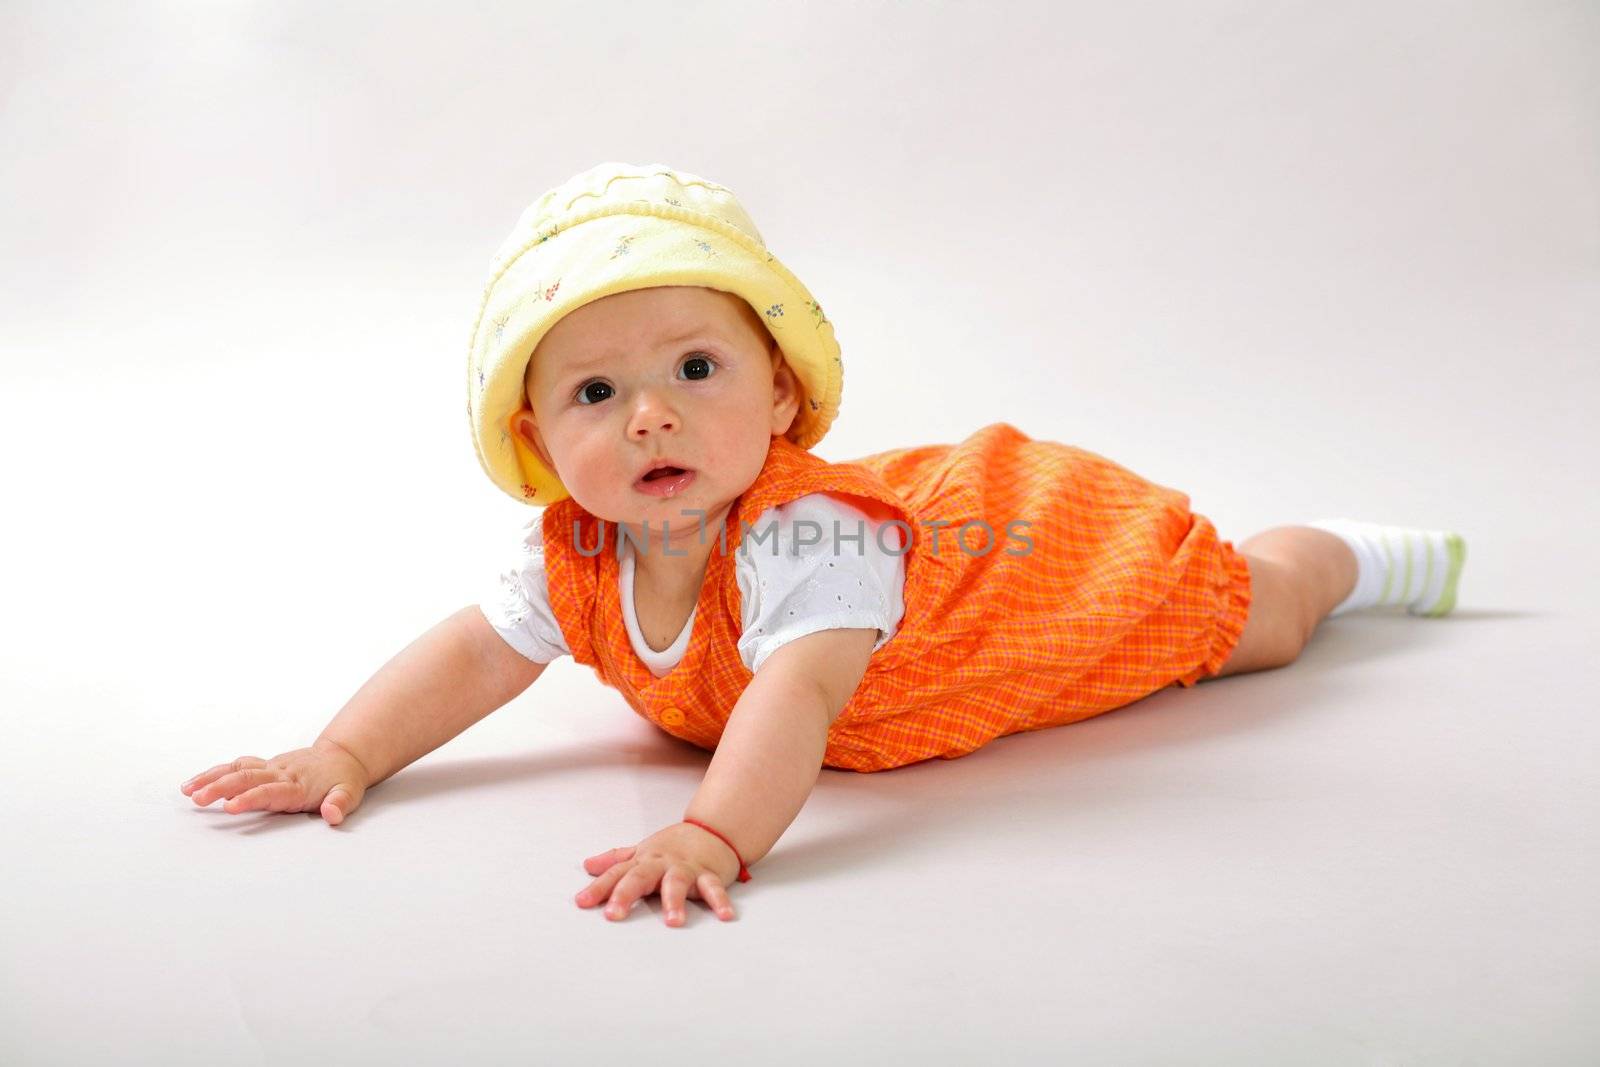 A nice baby-girl crawling on the floor